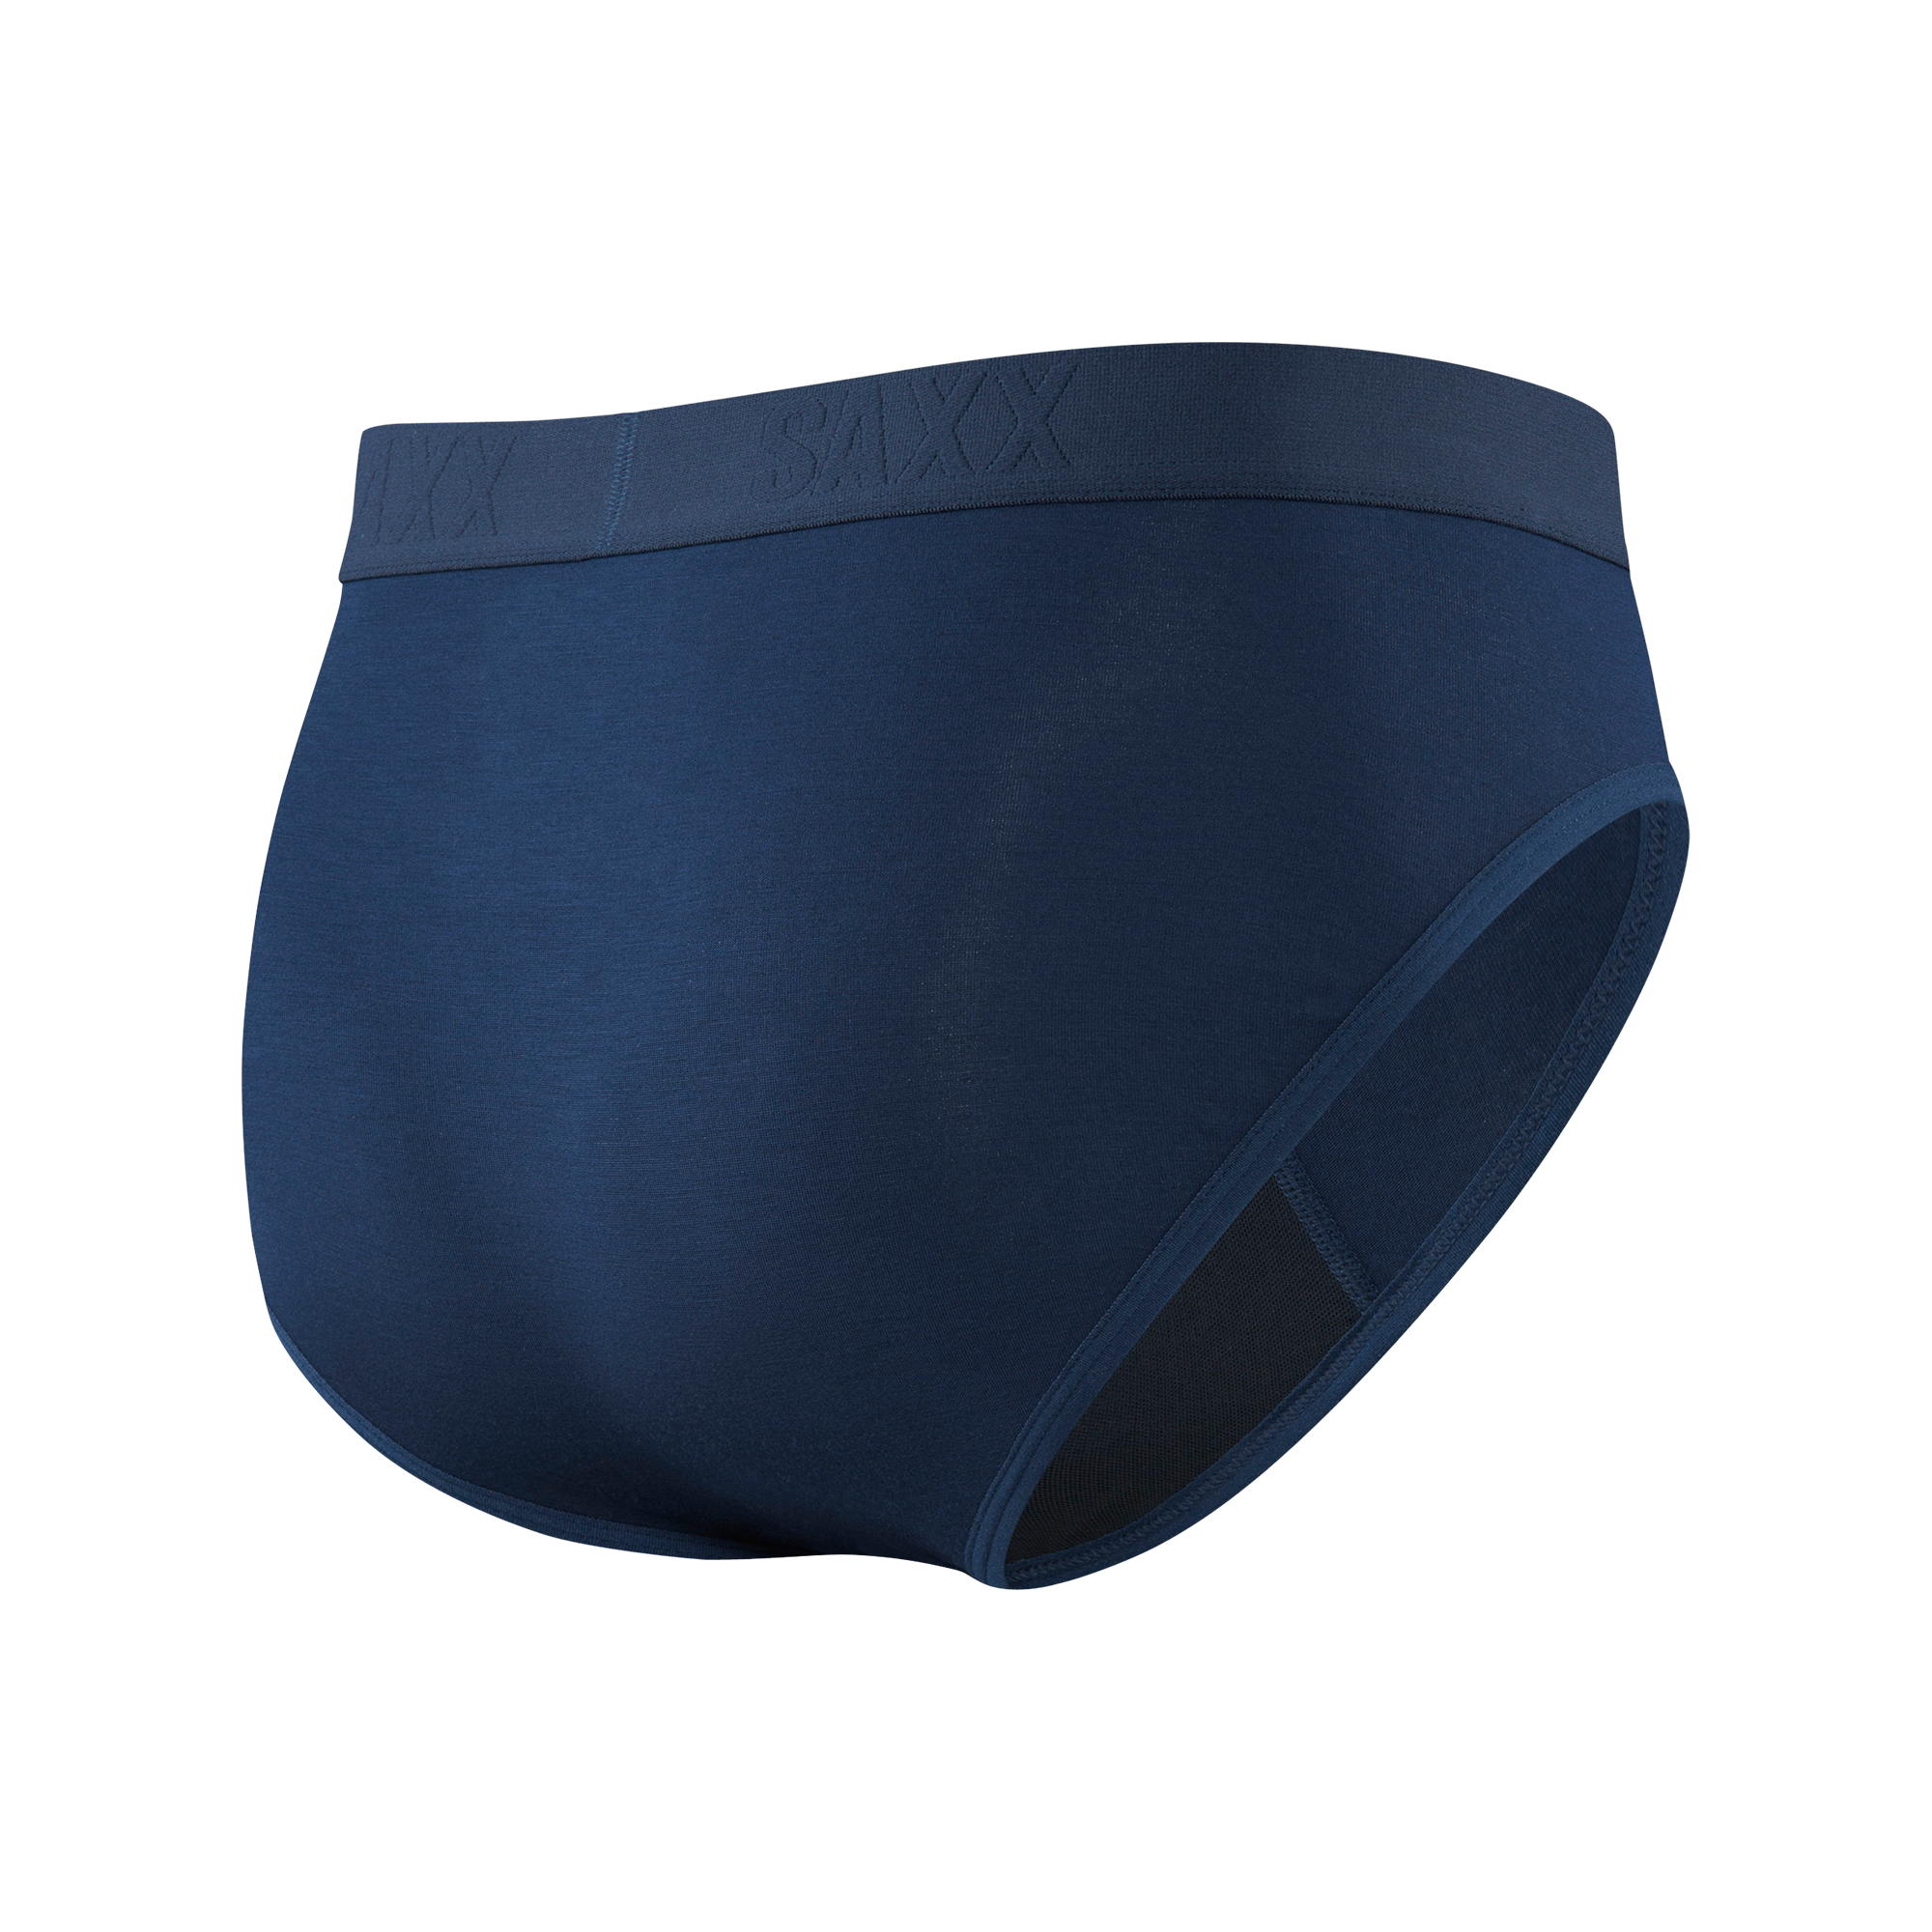 Back of Ultra Brief Fly in Navy Heather